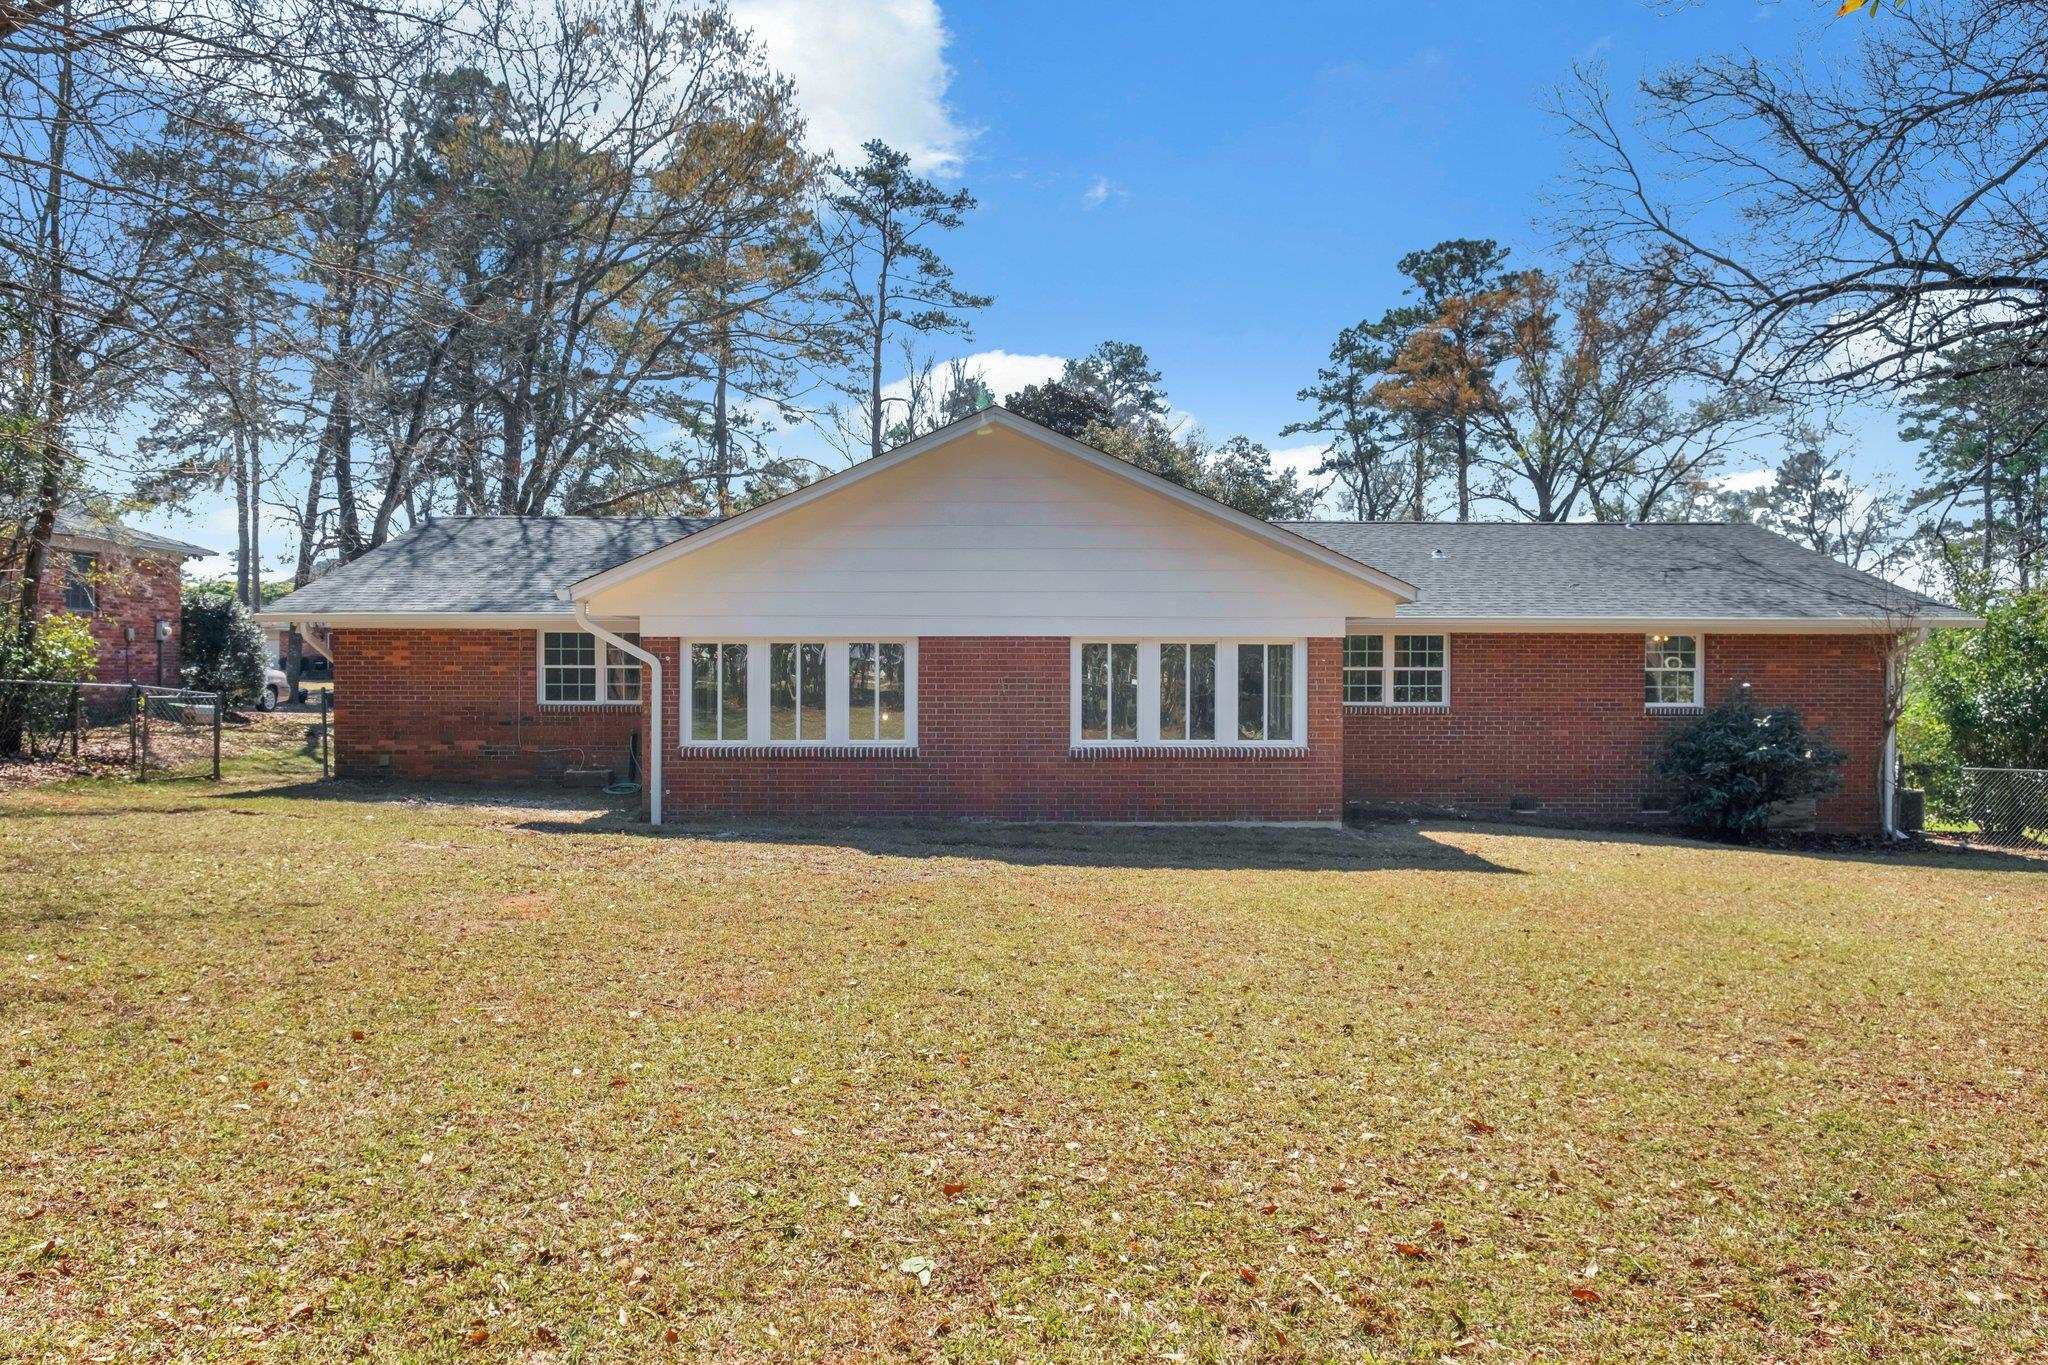 3020 Tipperary Drive,TALLAHASSEE,Florida 32309,3 Bedrooms Bedrooms,2 BathroomsBathrooms,Detached single family,3020 Tipperary Drive,368990